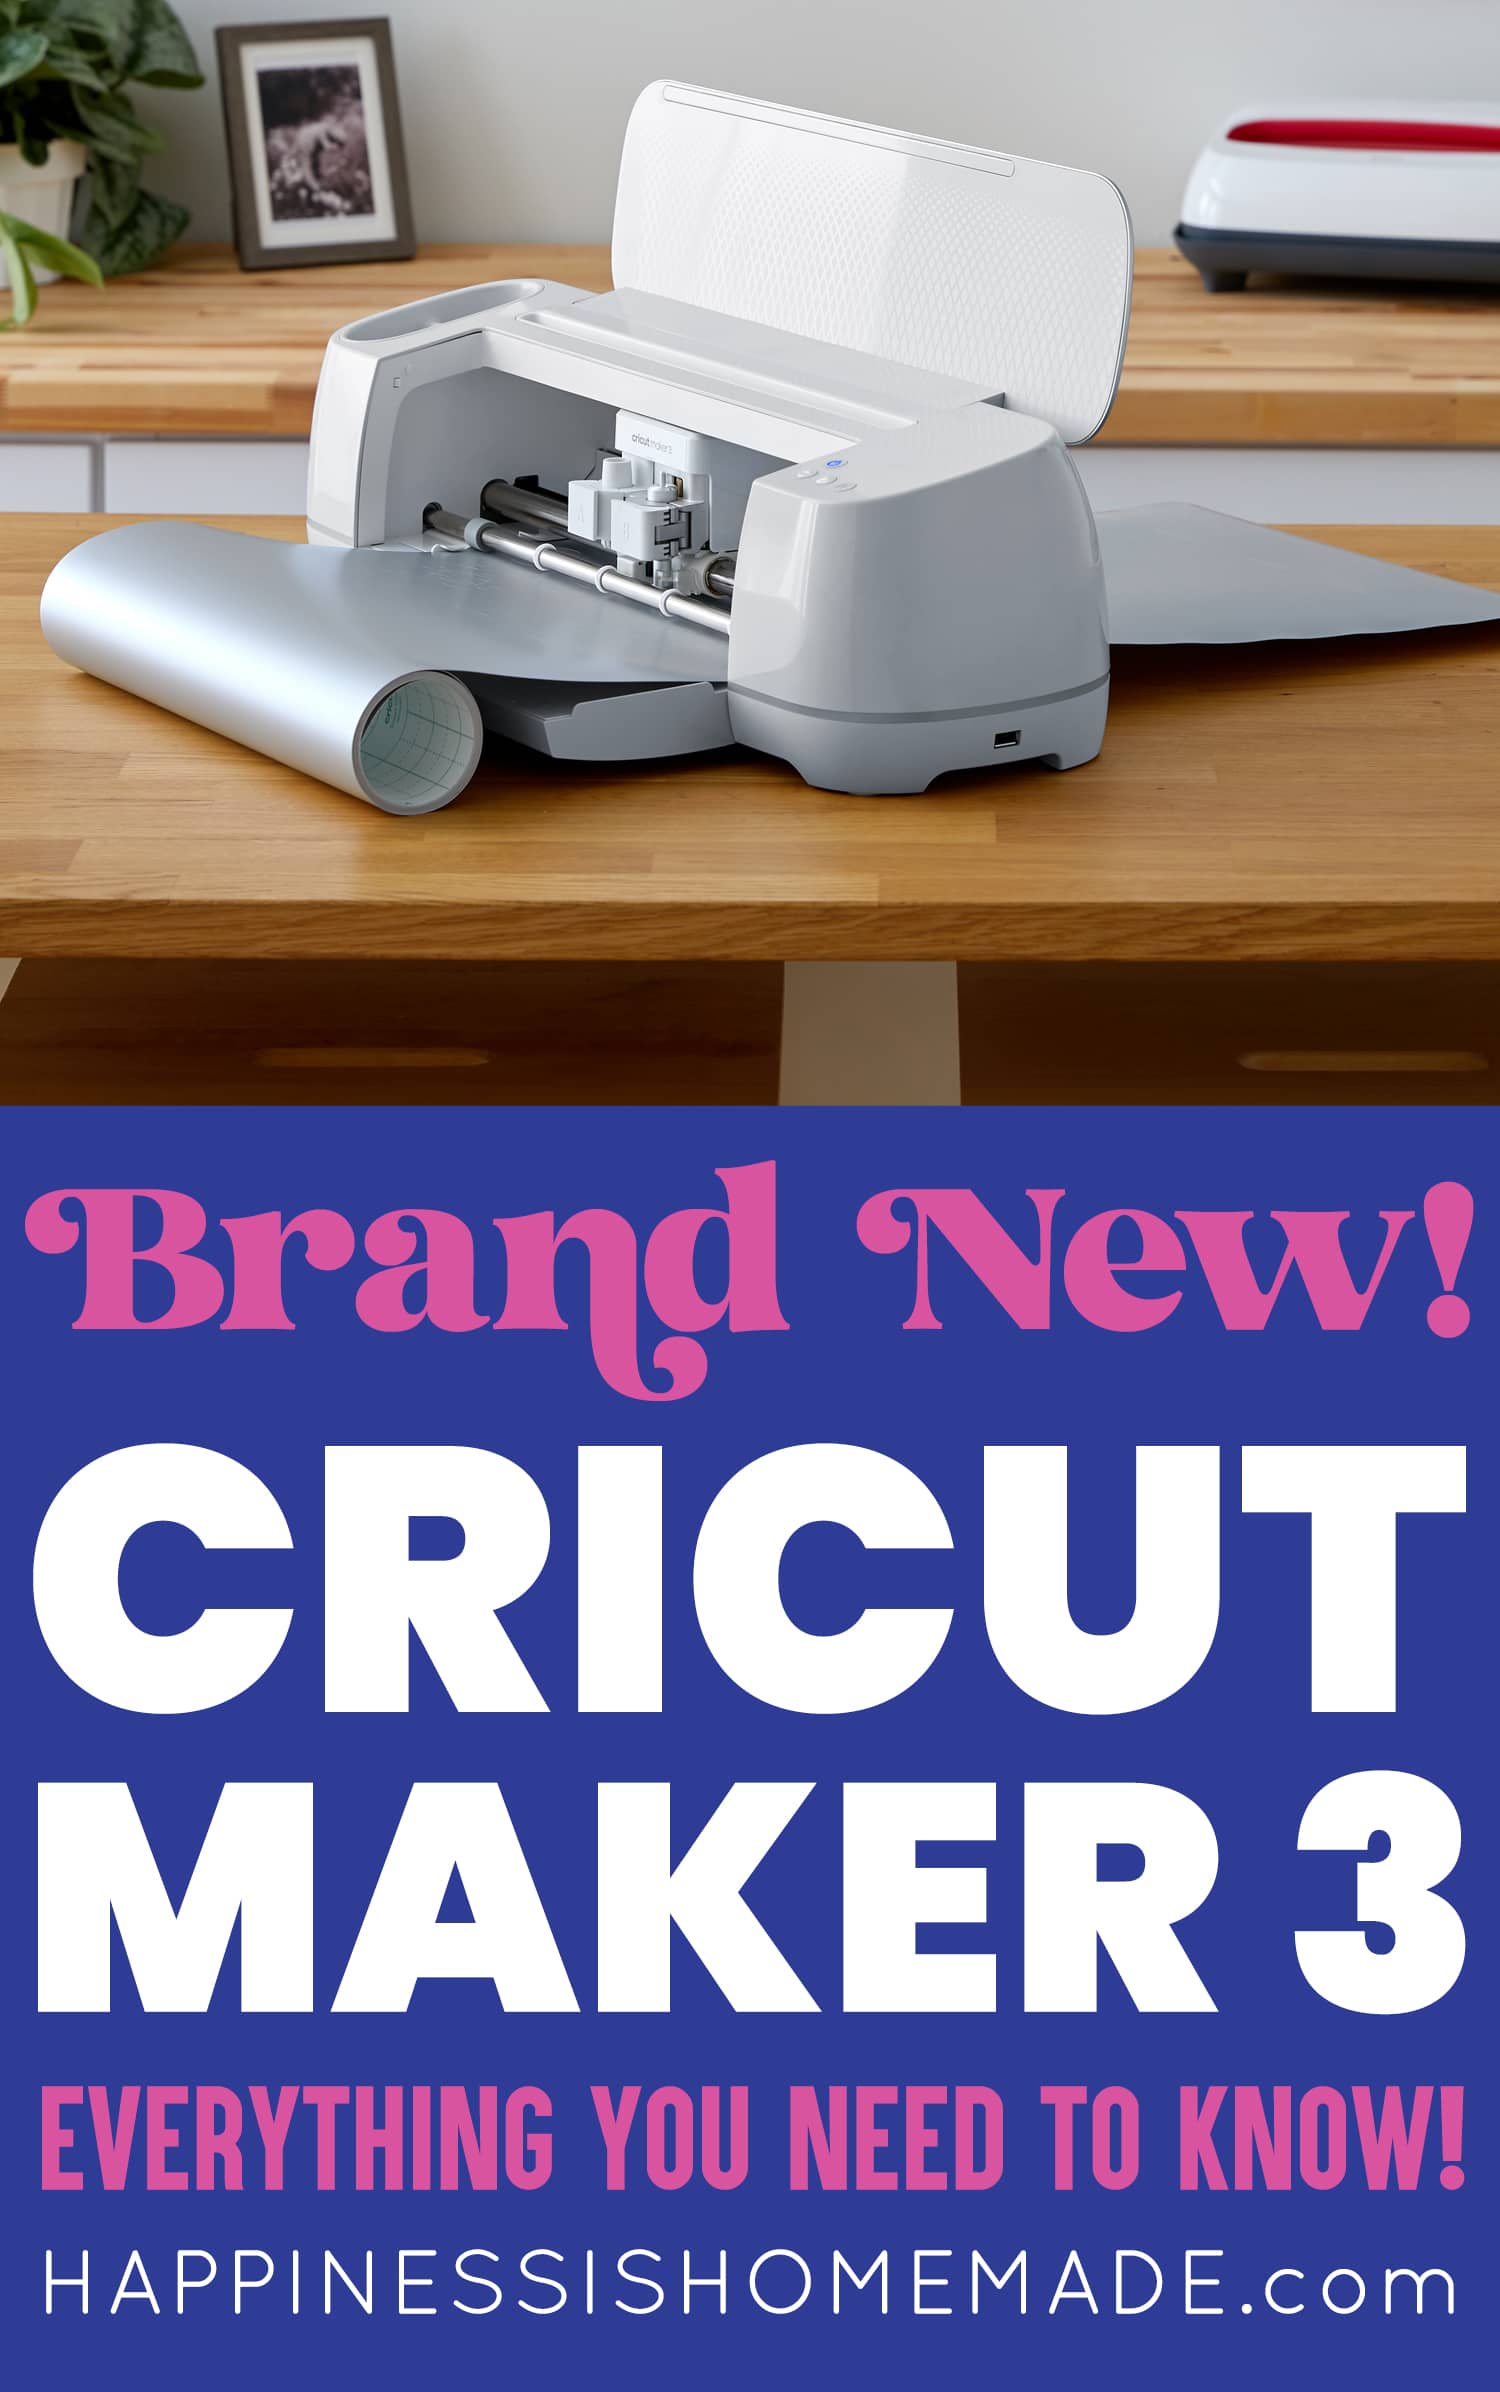 Cricut Machines: Everything You Need to Know